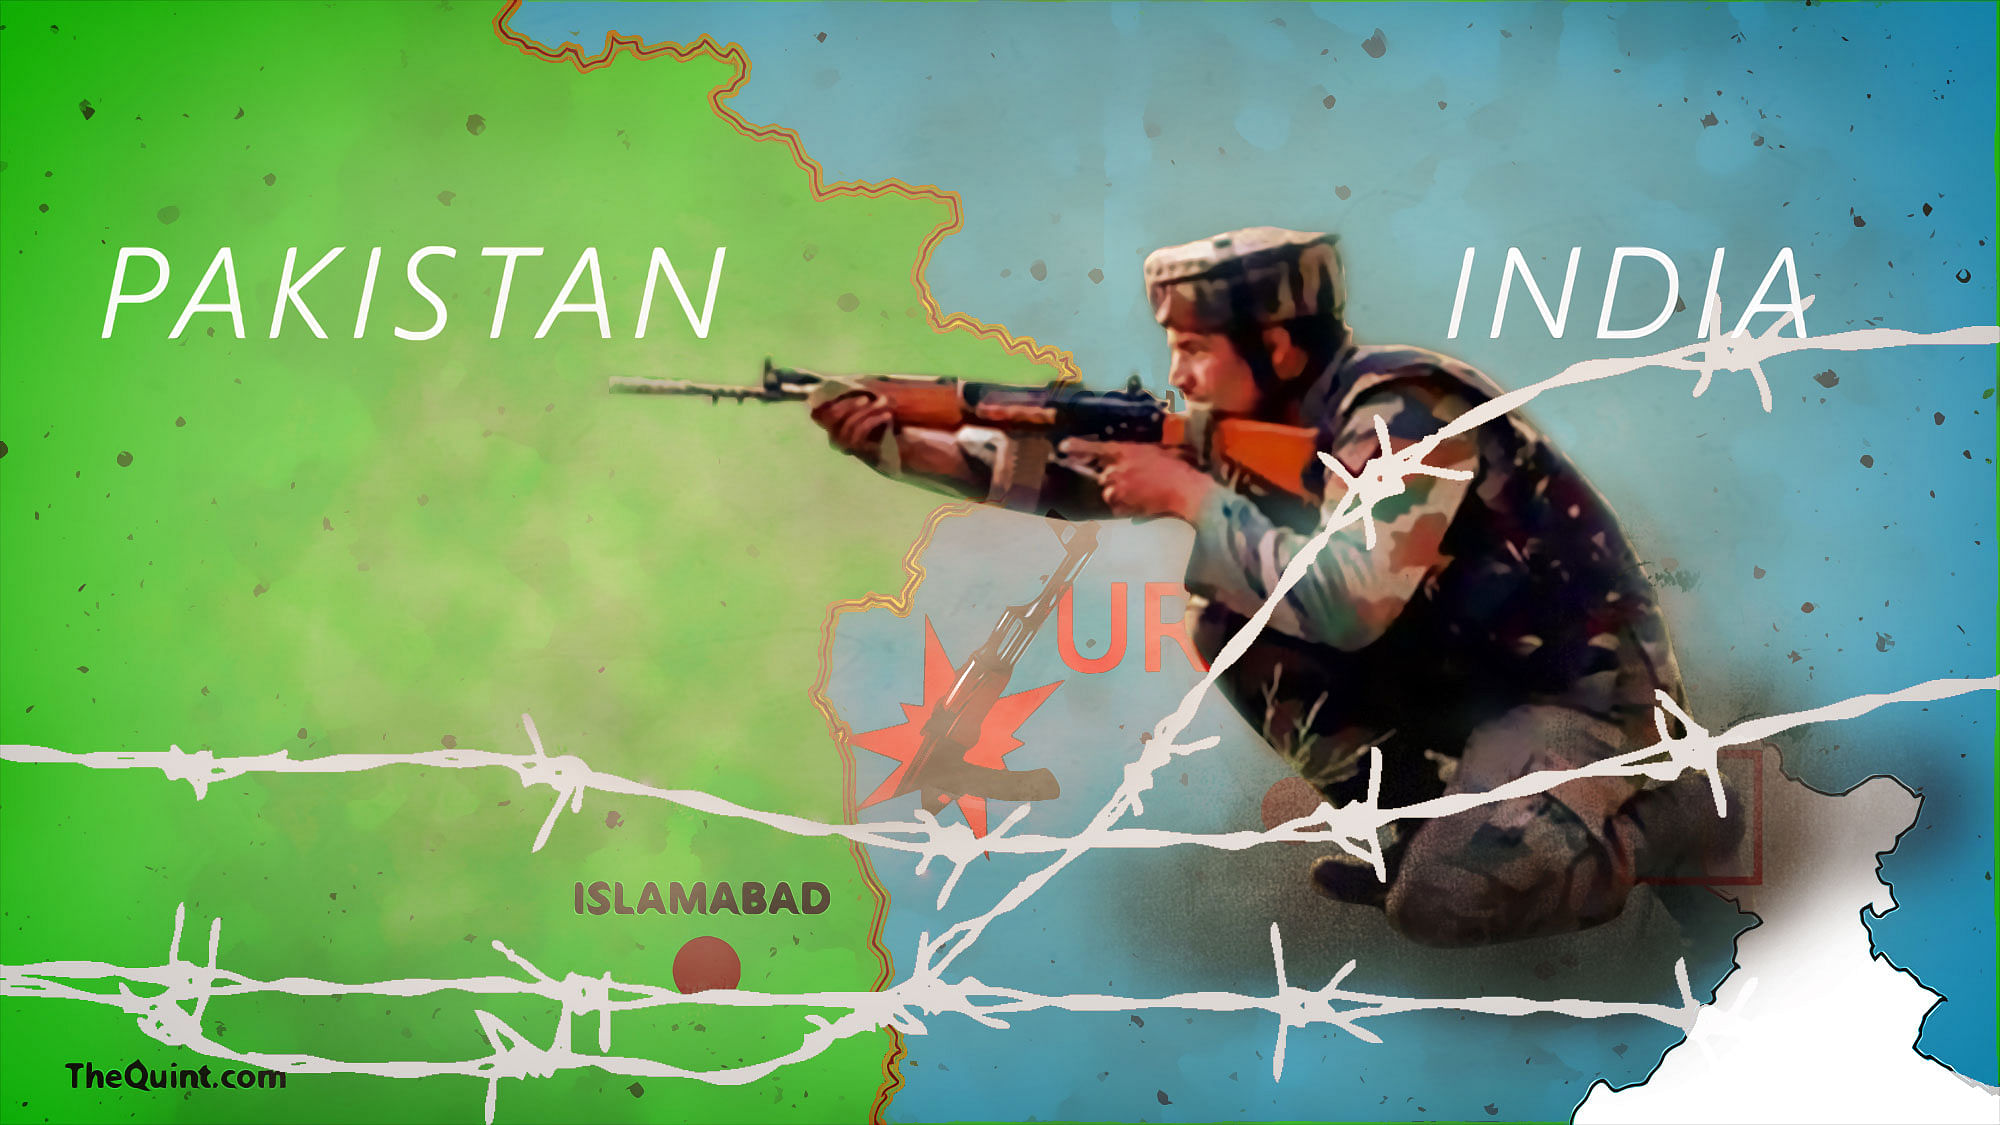 Surgical strikes by the Indian Army targeted terror camps which did not “have the protection” of the Pakistani army or its BAT (battalion action teams). 